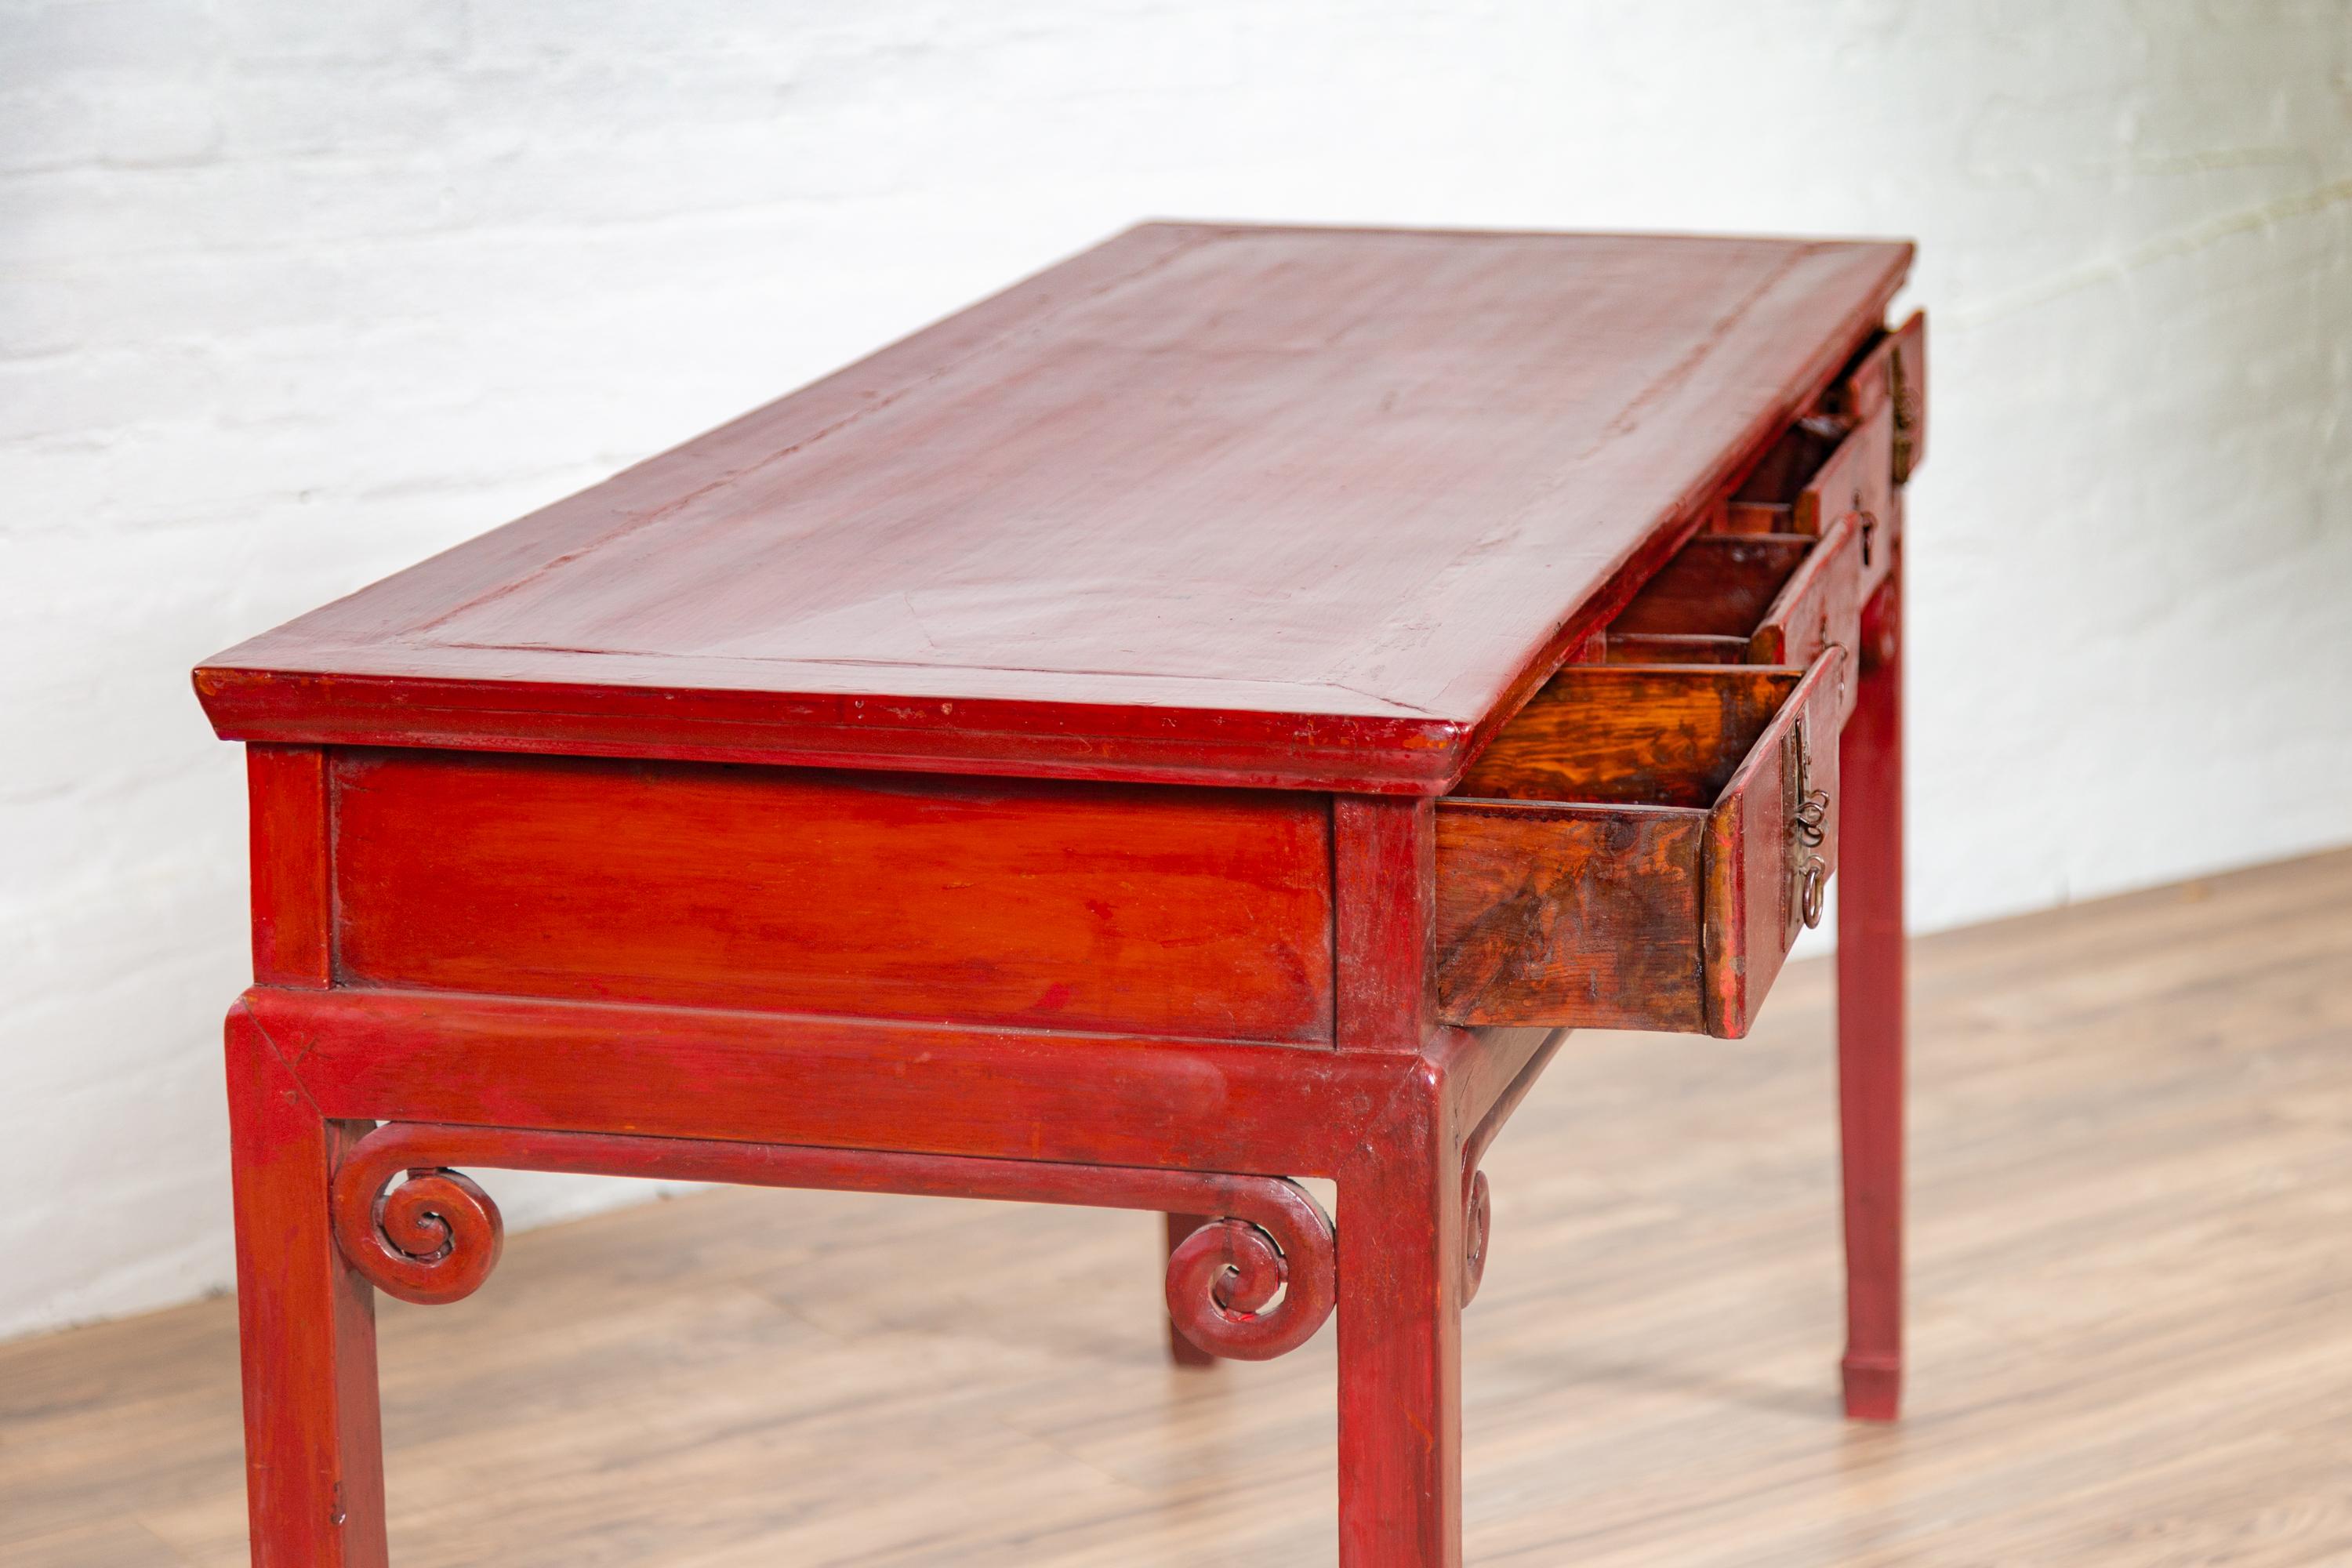 Chinese Antique Red Lacquered Wooden Desk with Four Drawers and Curling Scrolls 7